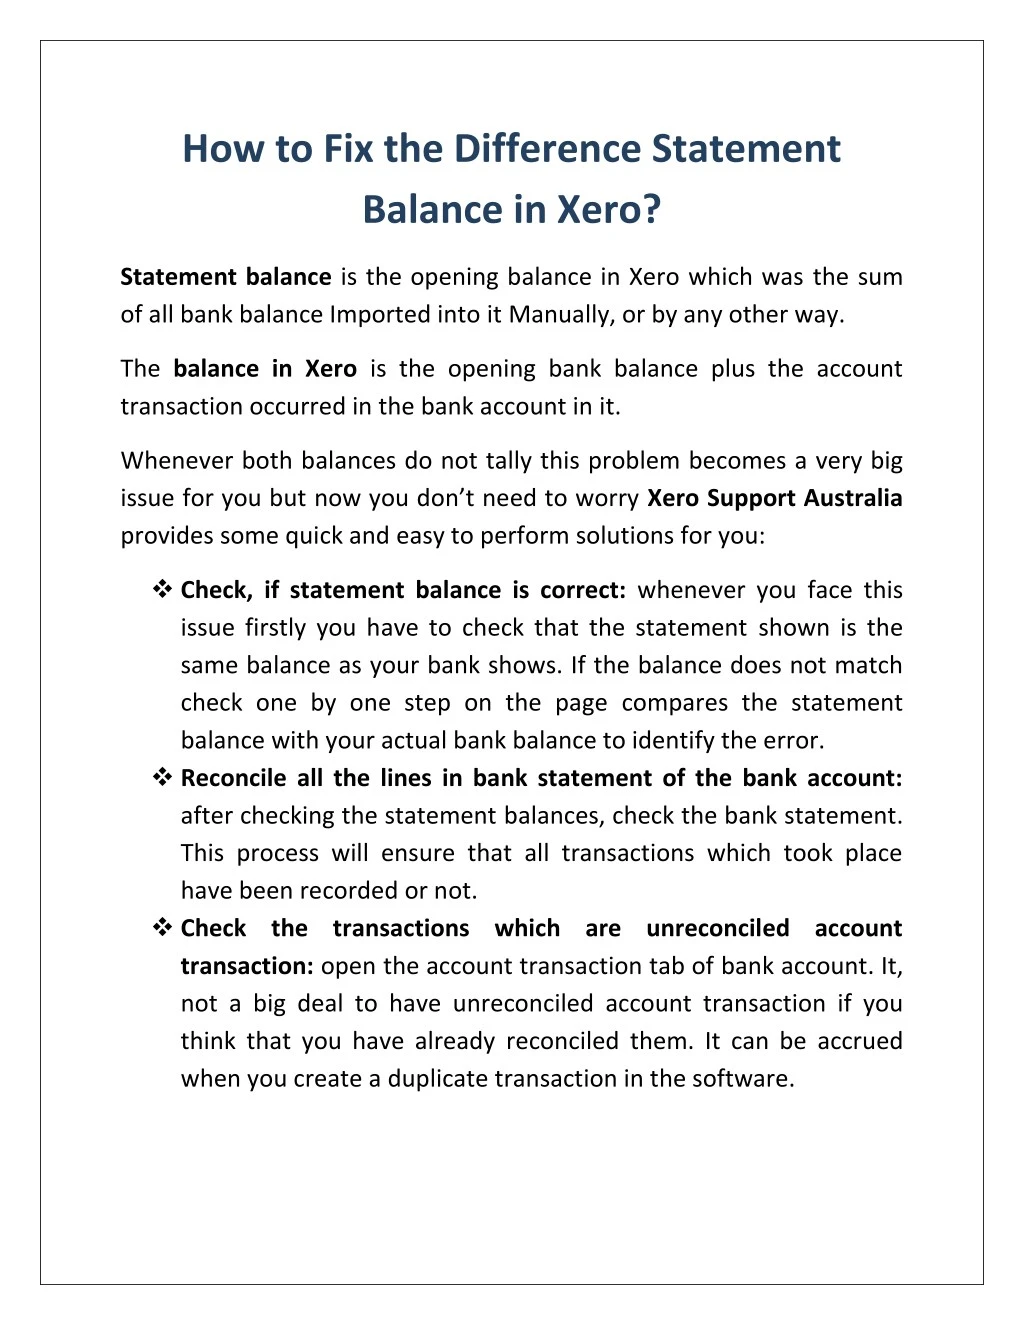 how to fix the difference statement balance